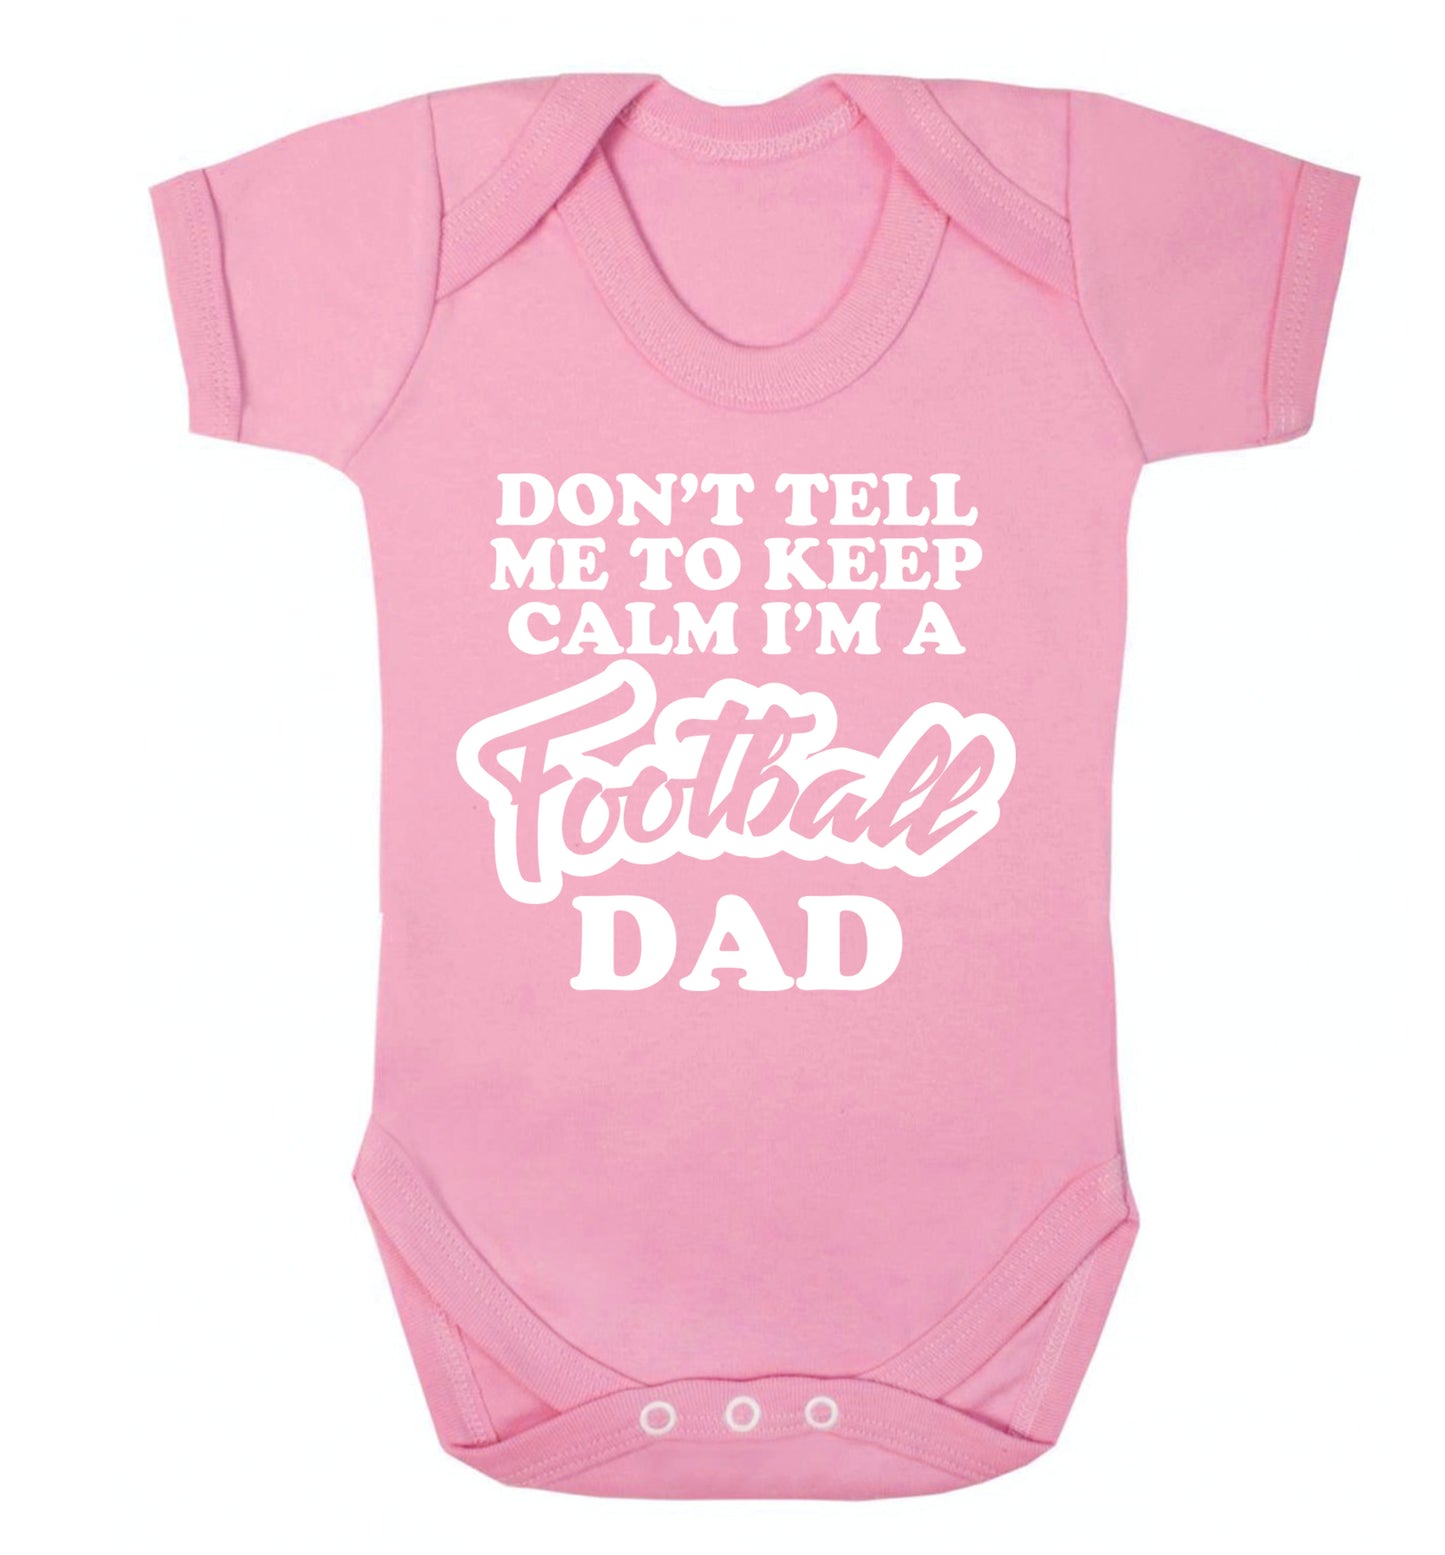 Don't tell me to keep calm I'm a football dad Baby Vest pale pink 18-24 months